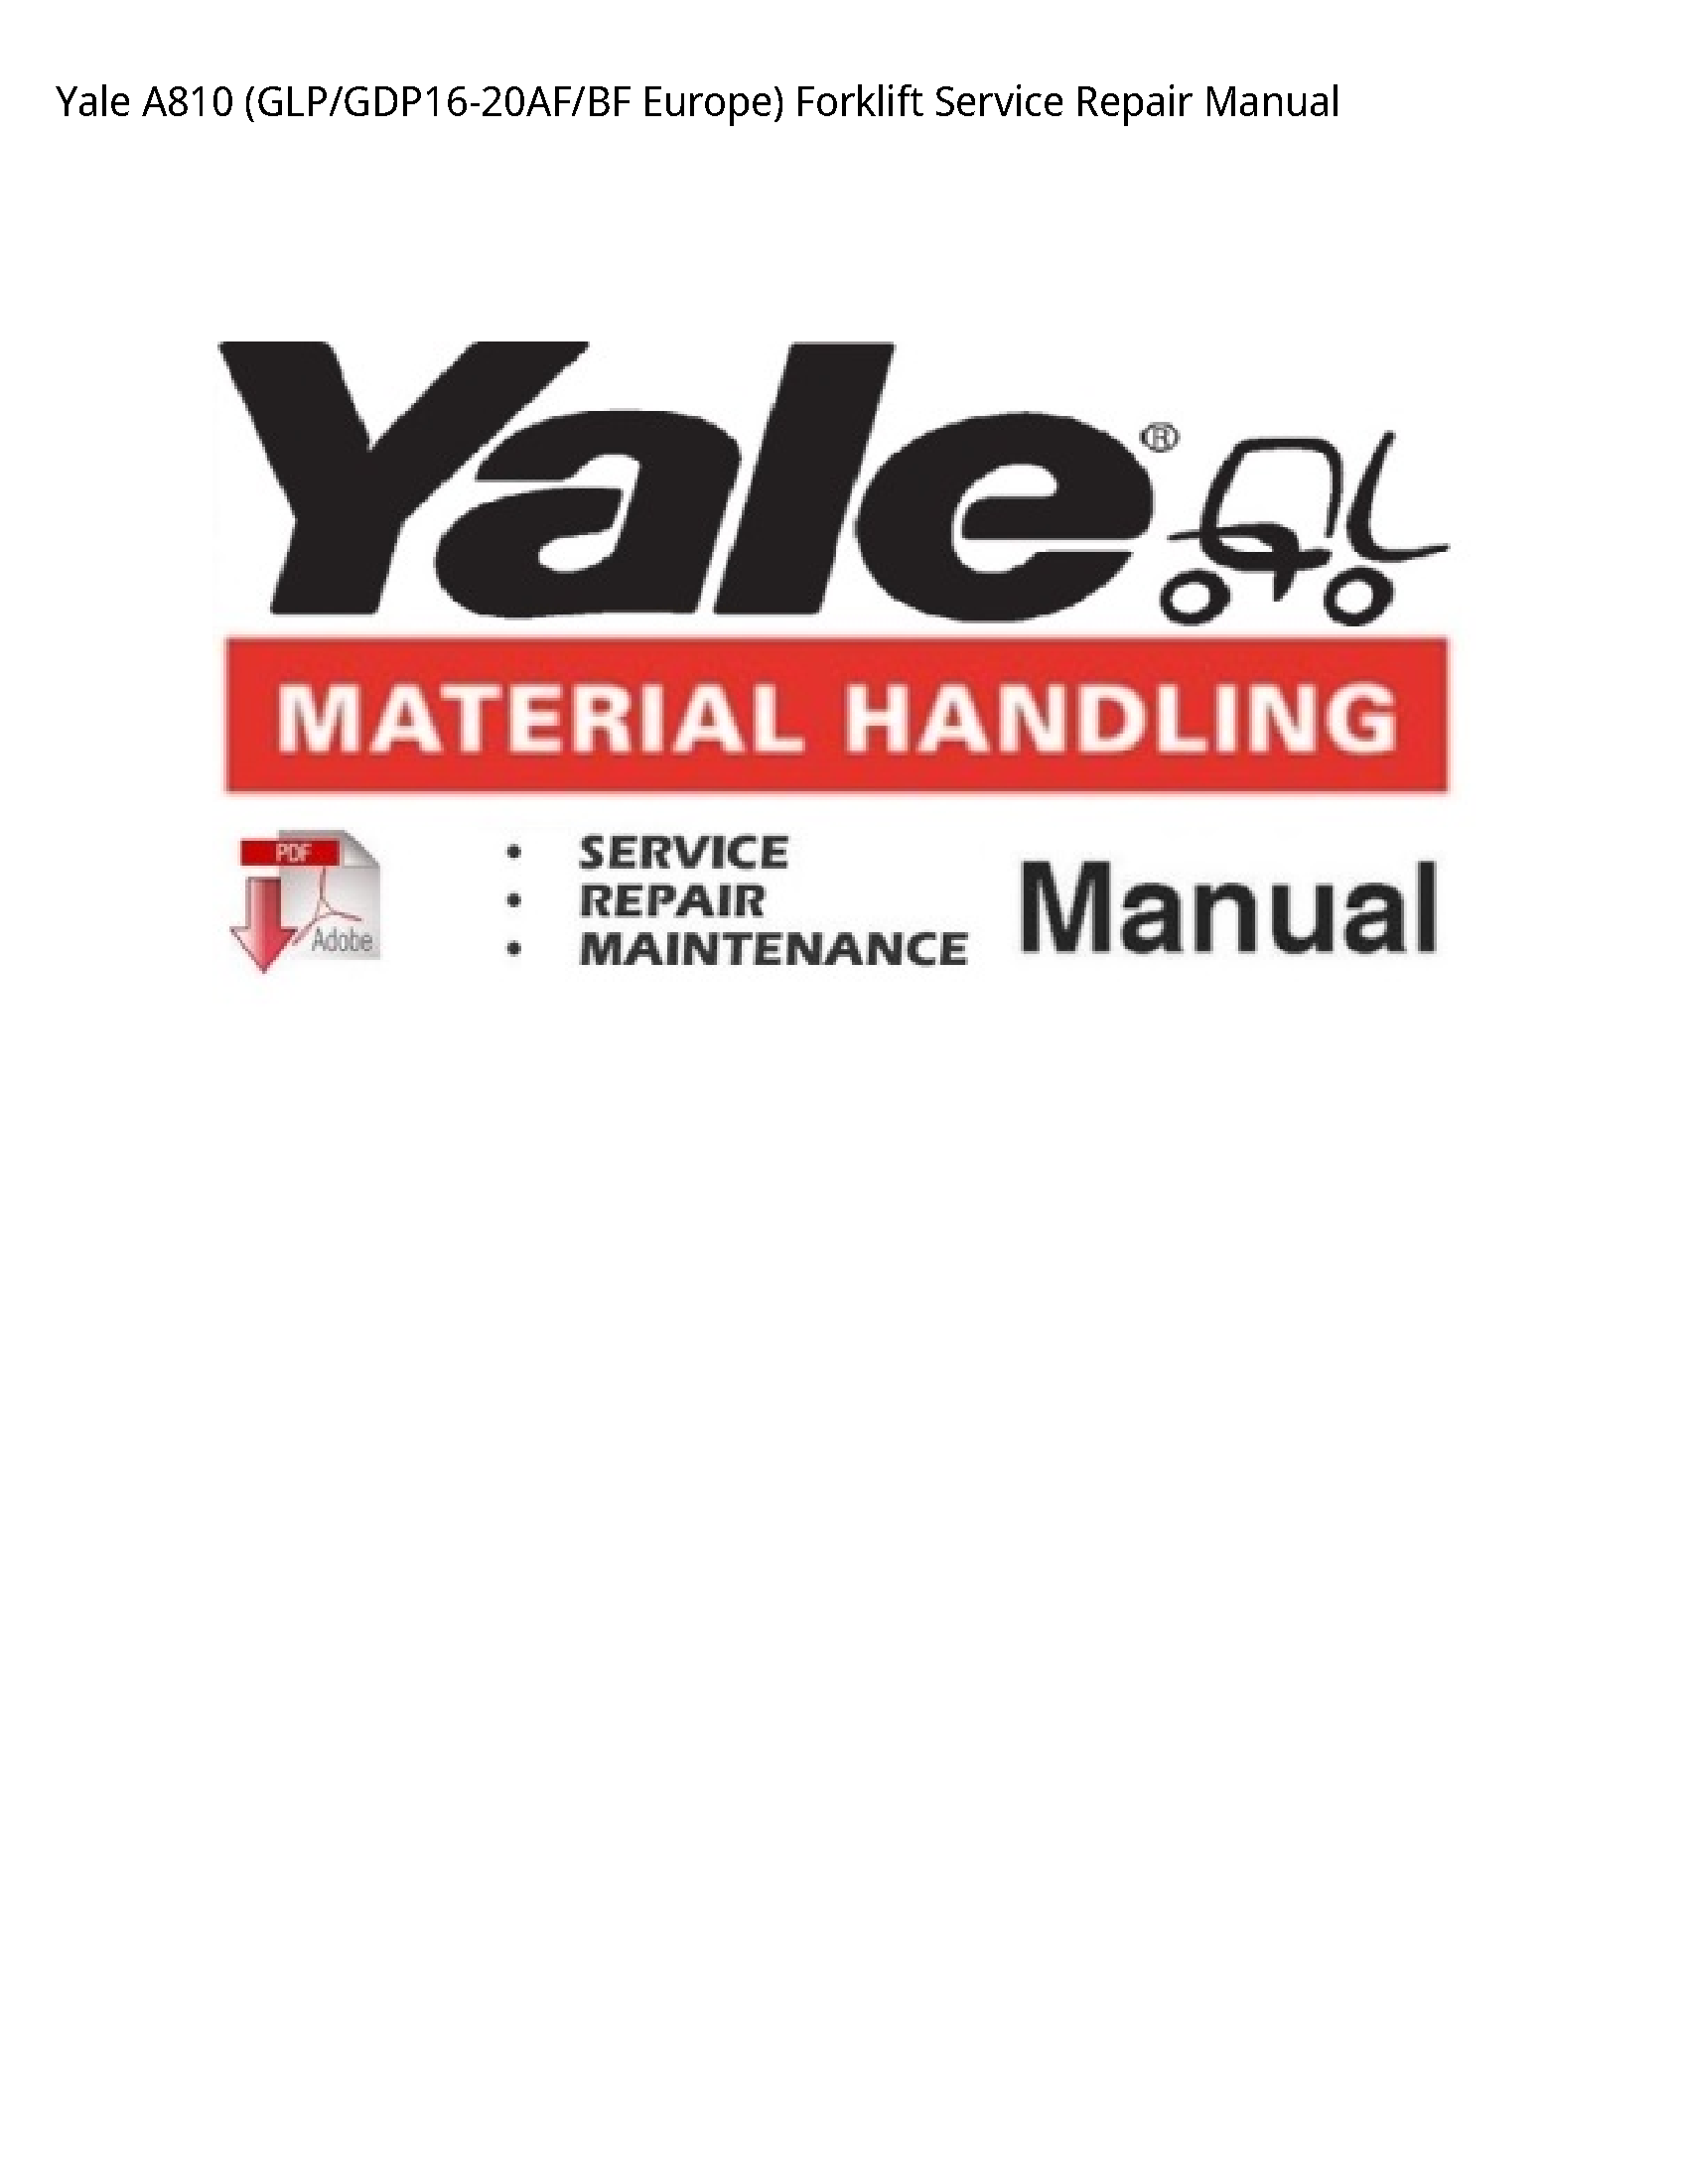 Yale A810 Europe) Forklift manual